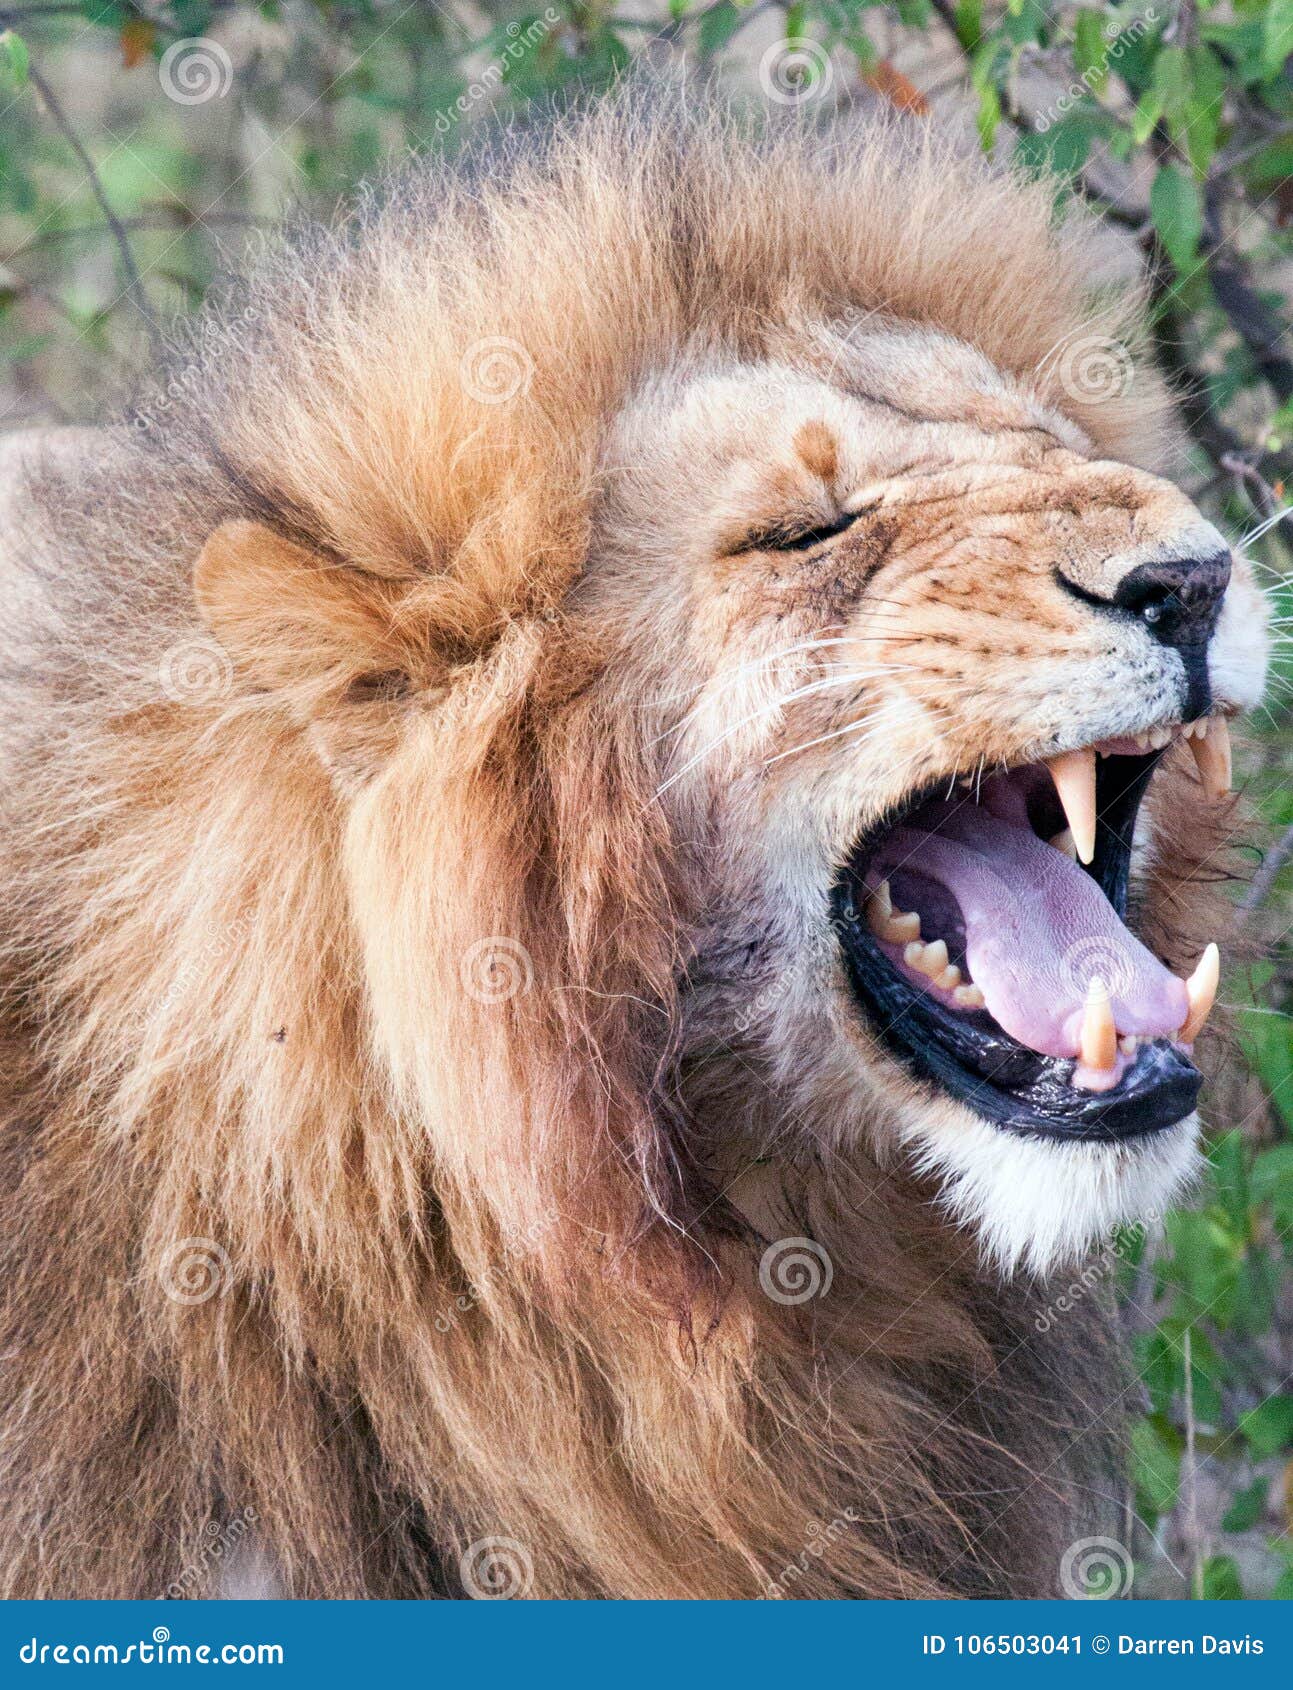 Male Lion With Mouth Open During Flehmen Response Stock Image Image